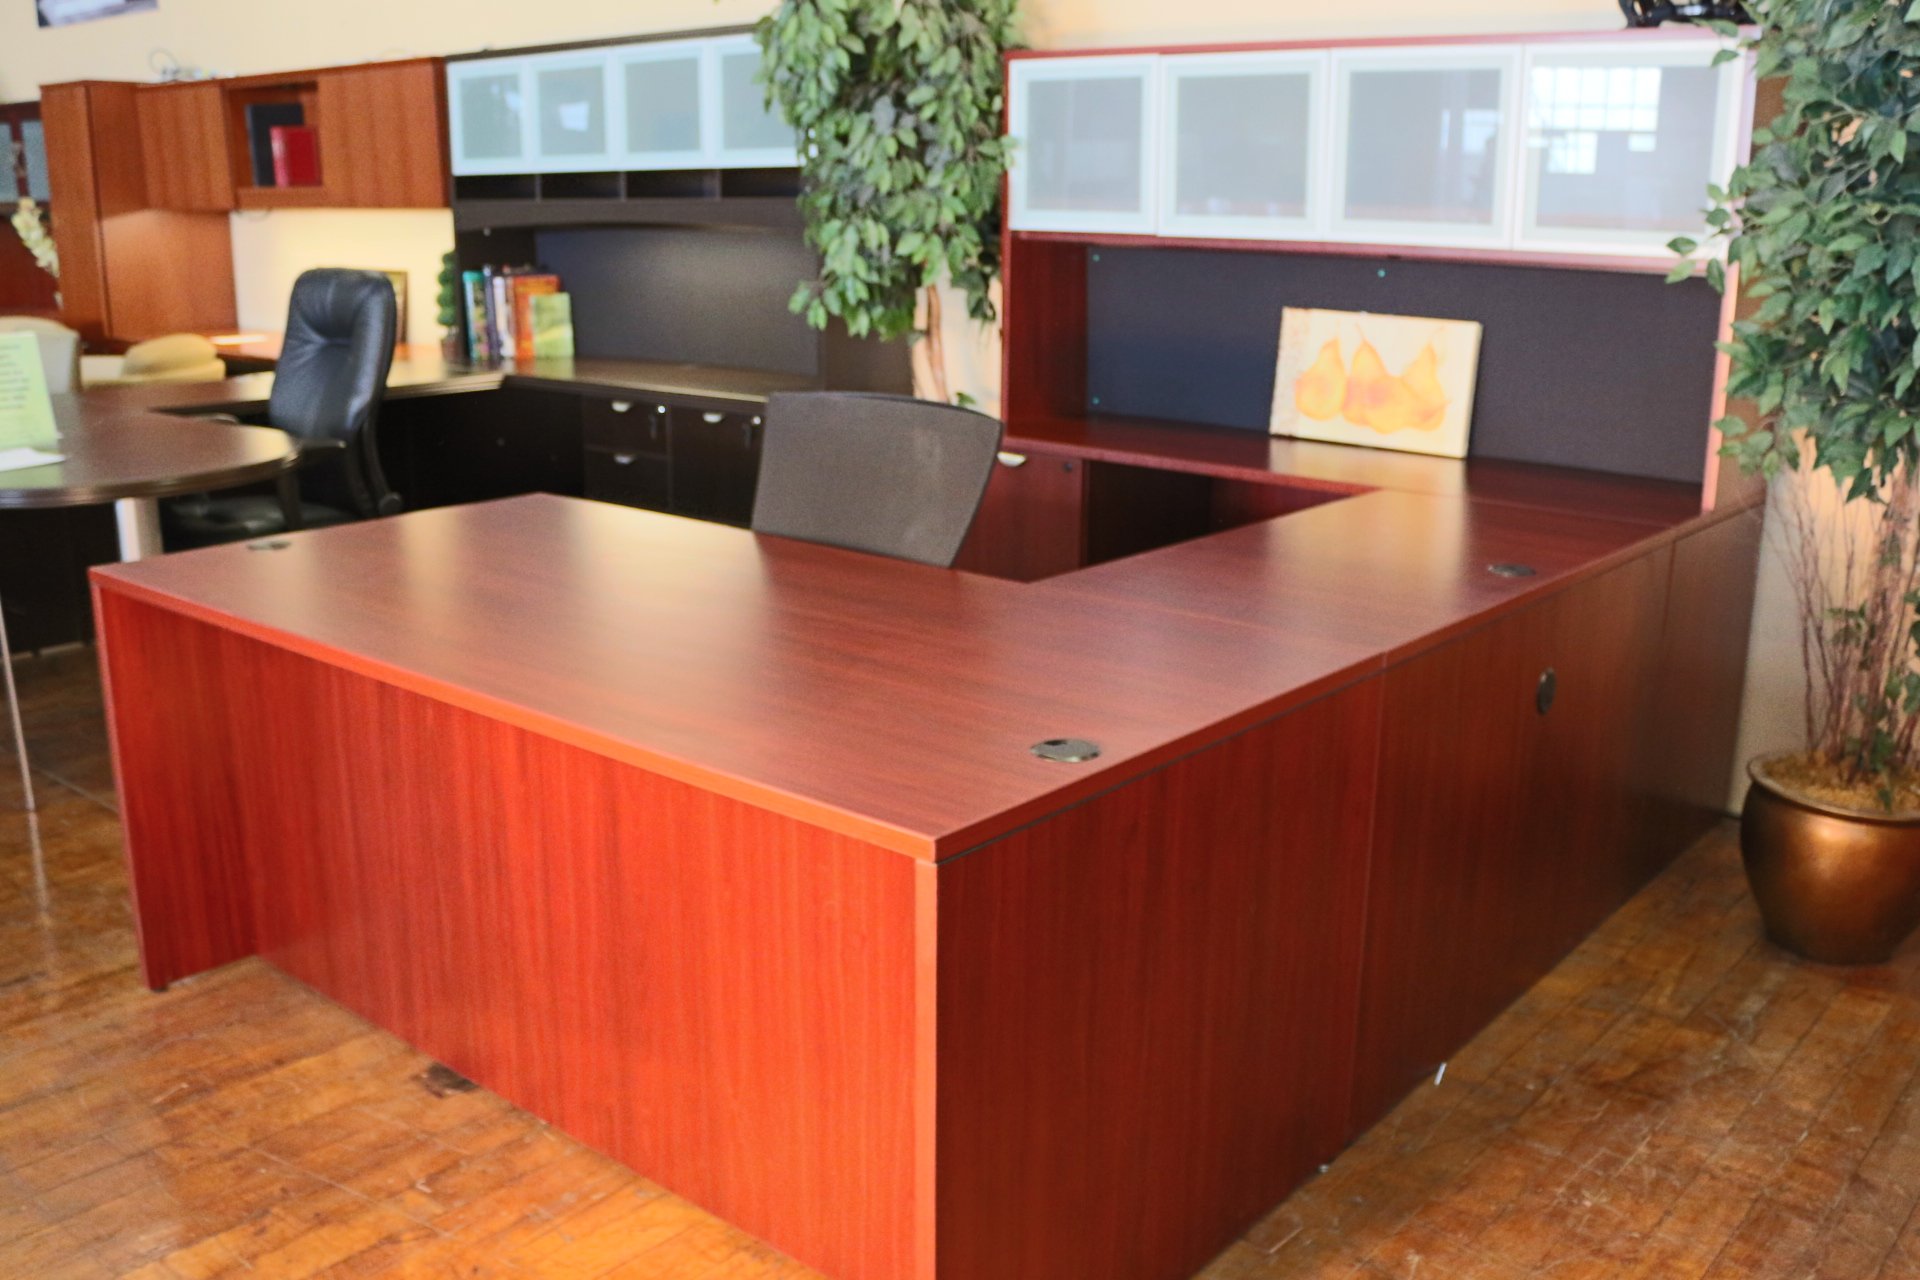 New Laminate U-shaped desk with chrome and glass doors